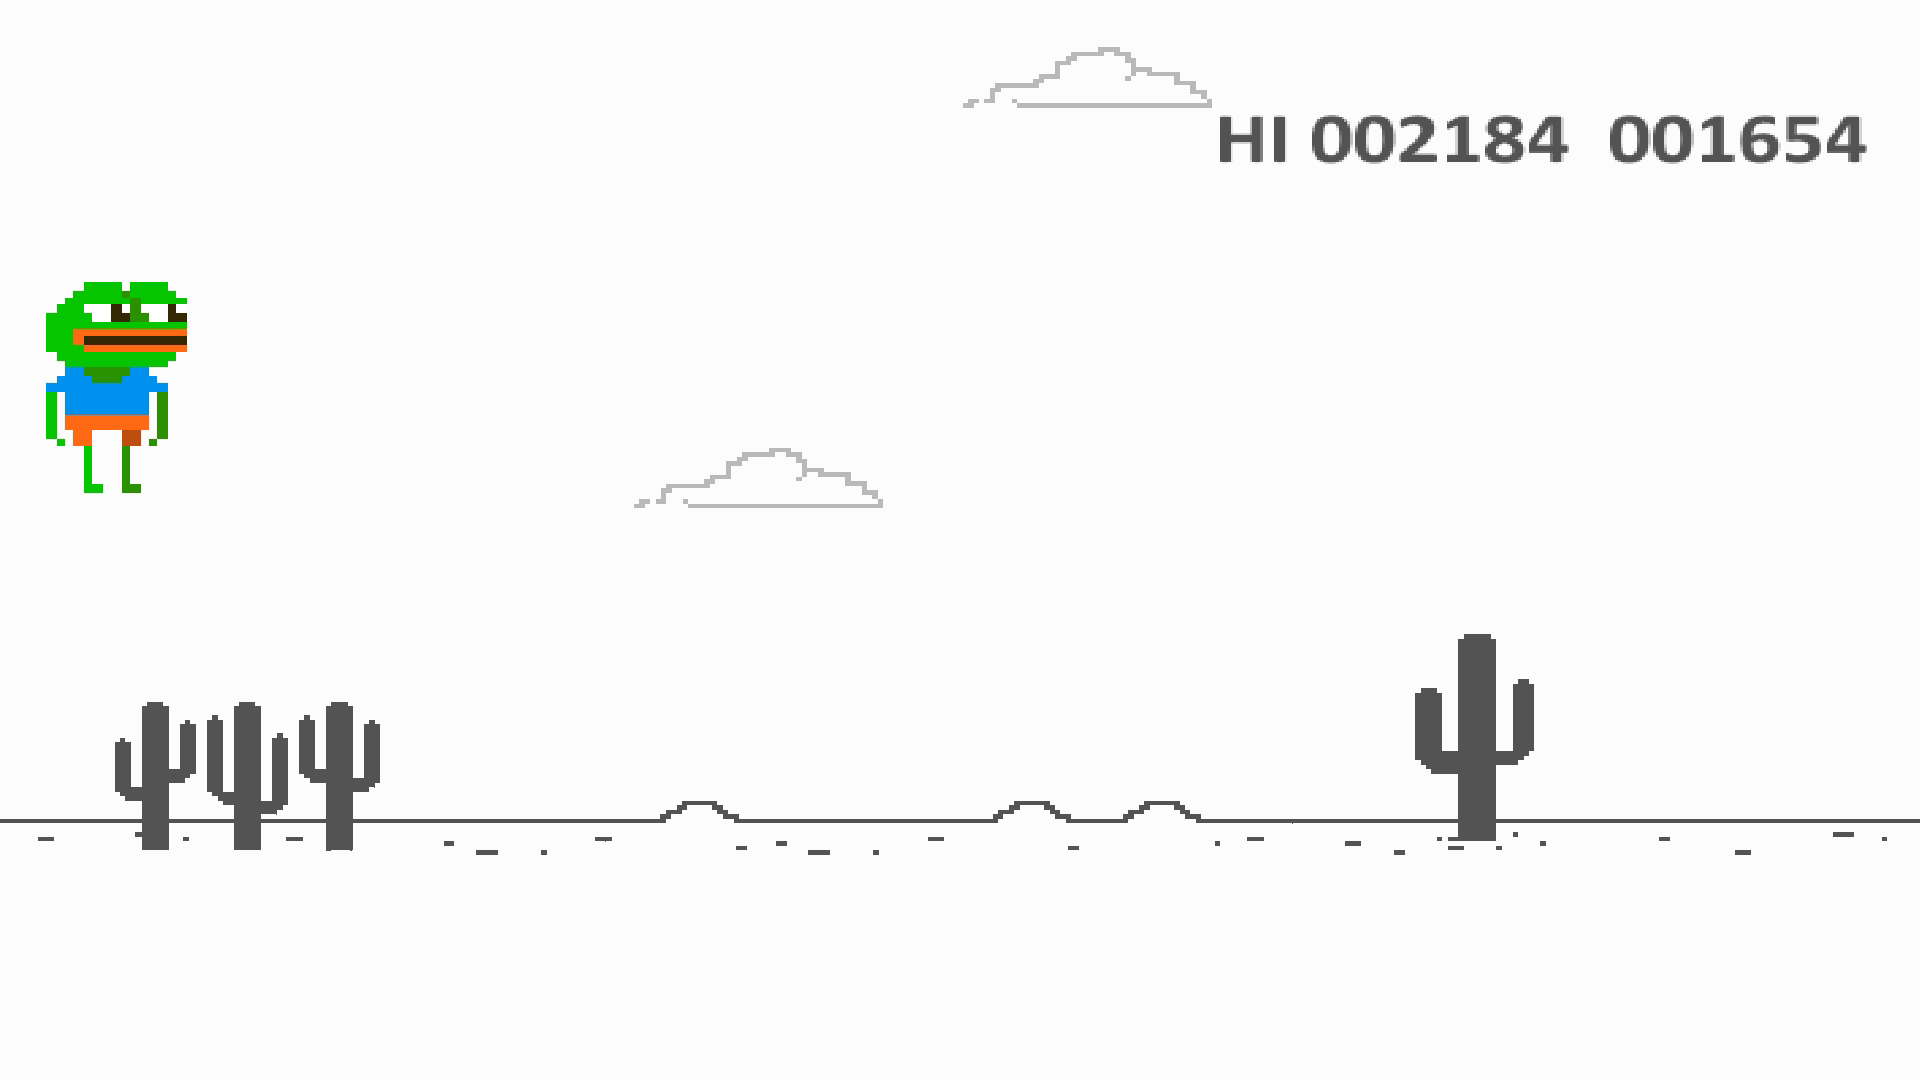 Doodle Dino Run for Android - Free App Download